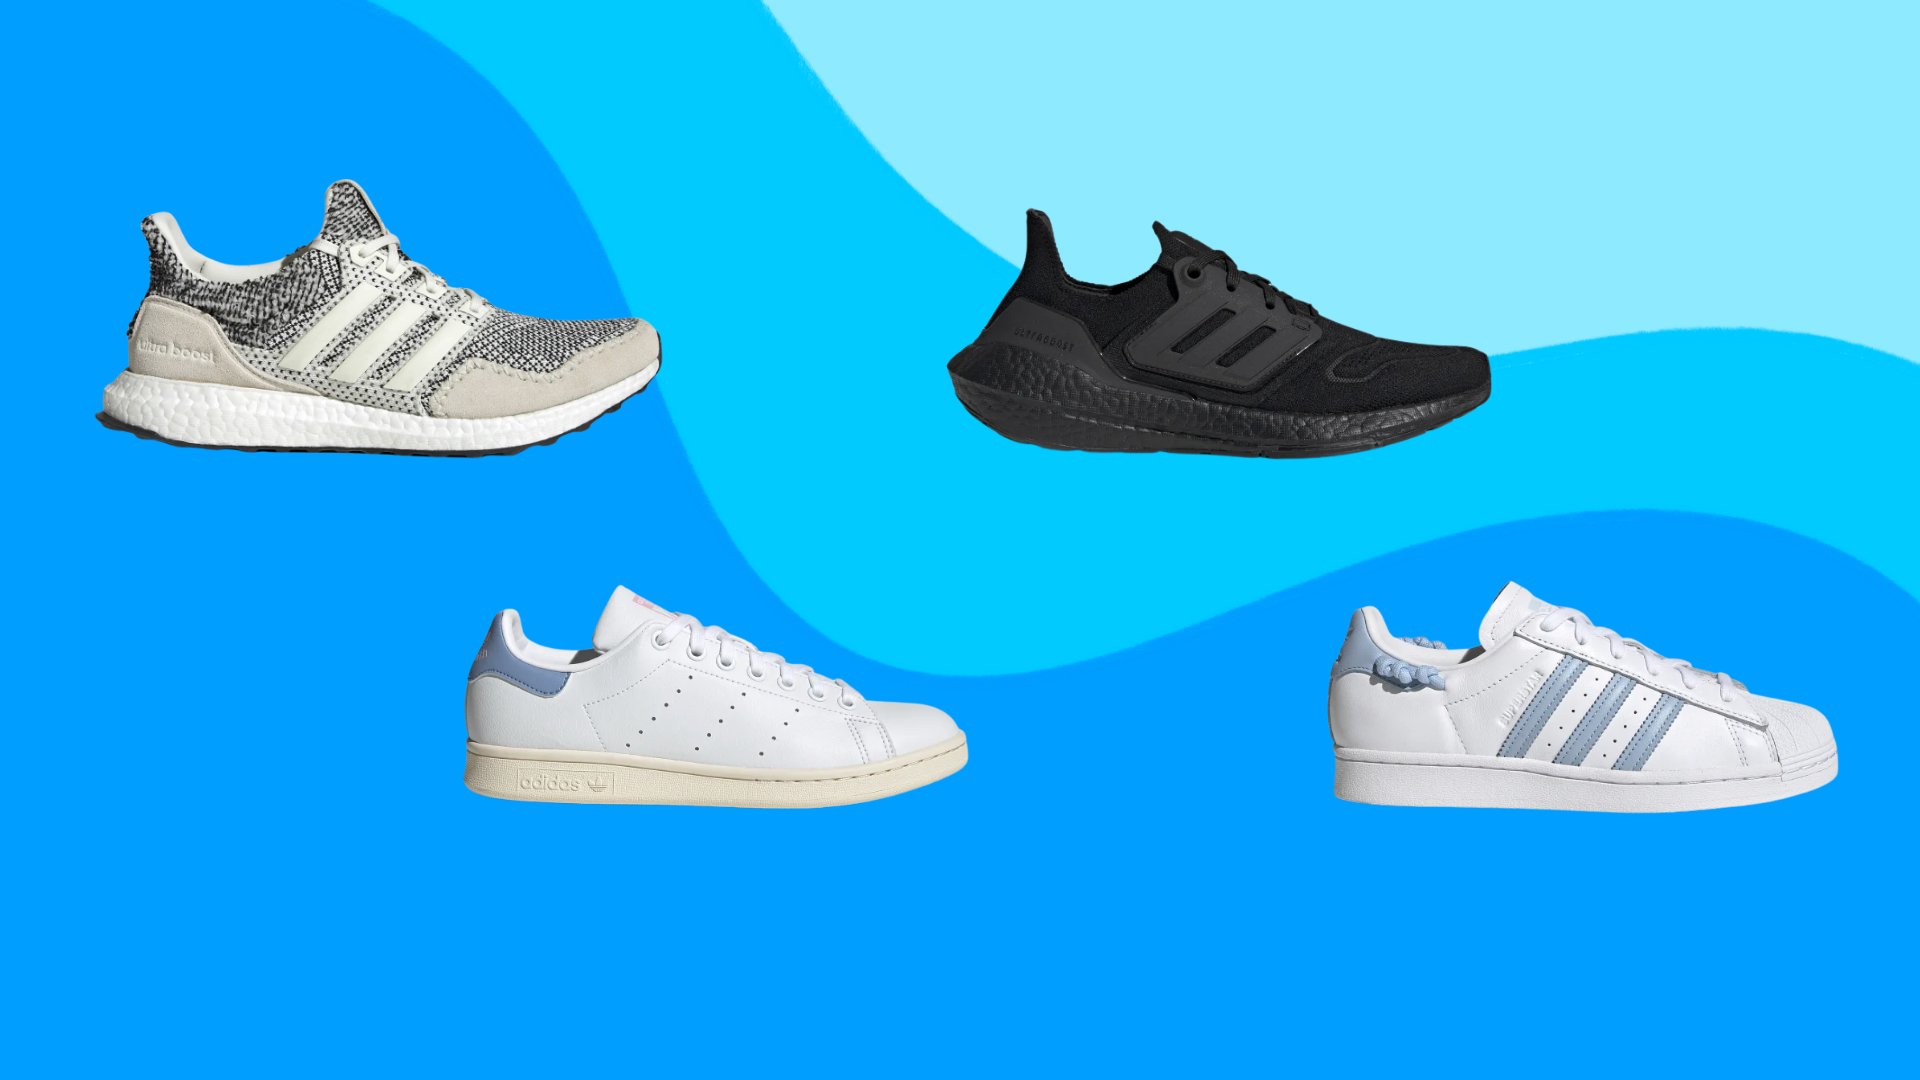 trabajo Ejercicio mañanero Establecer Adidas sale: Members can save up to 40% on sneakers and apparel